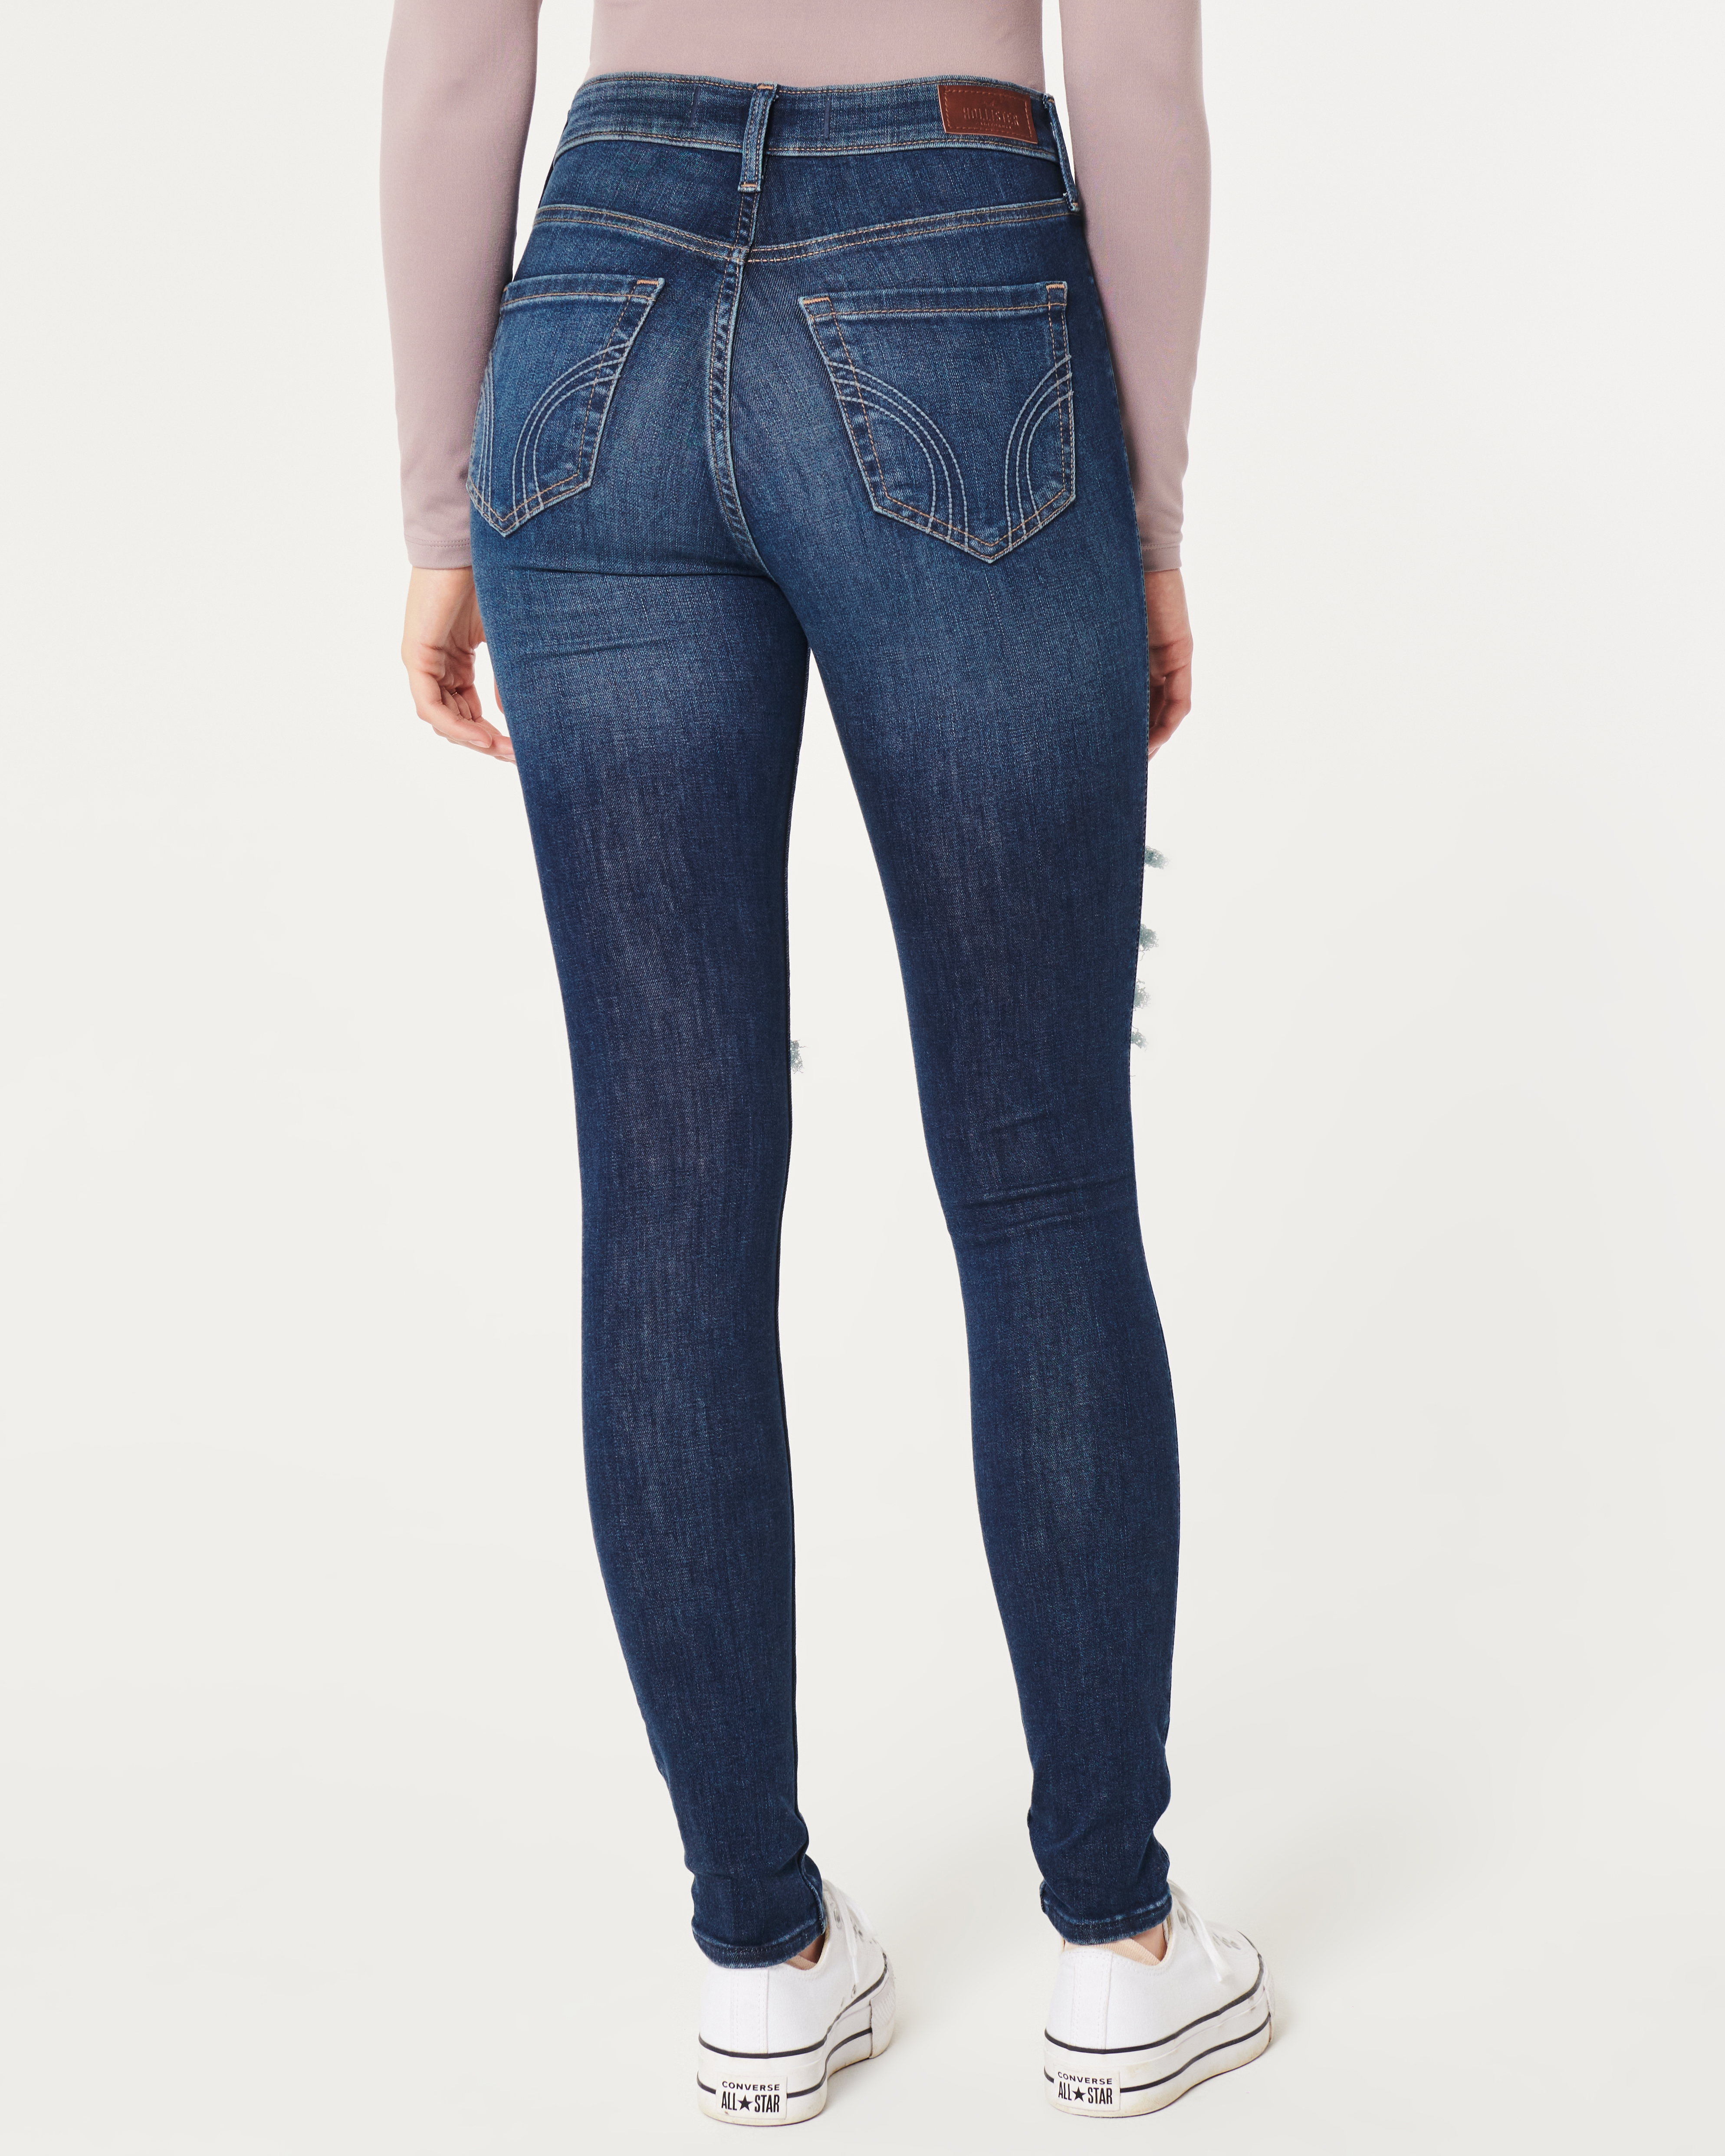 Hollister High-Rise Ripped Dark Wash Super Skinny Jeans